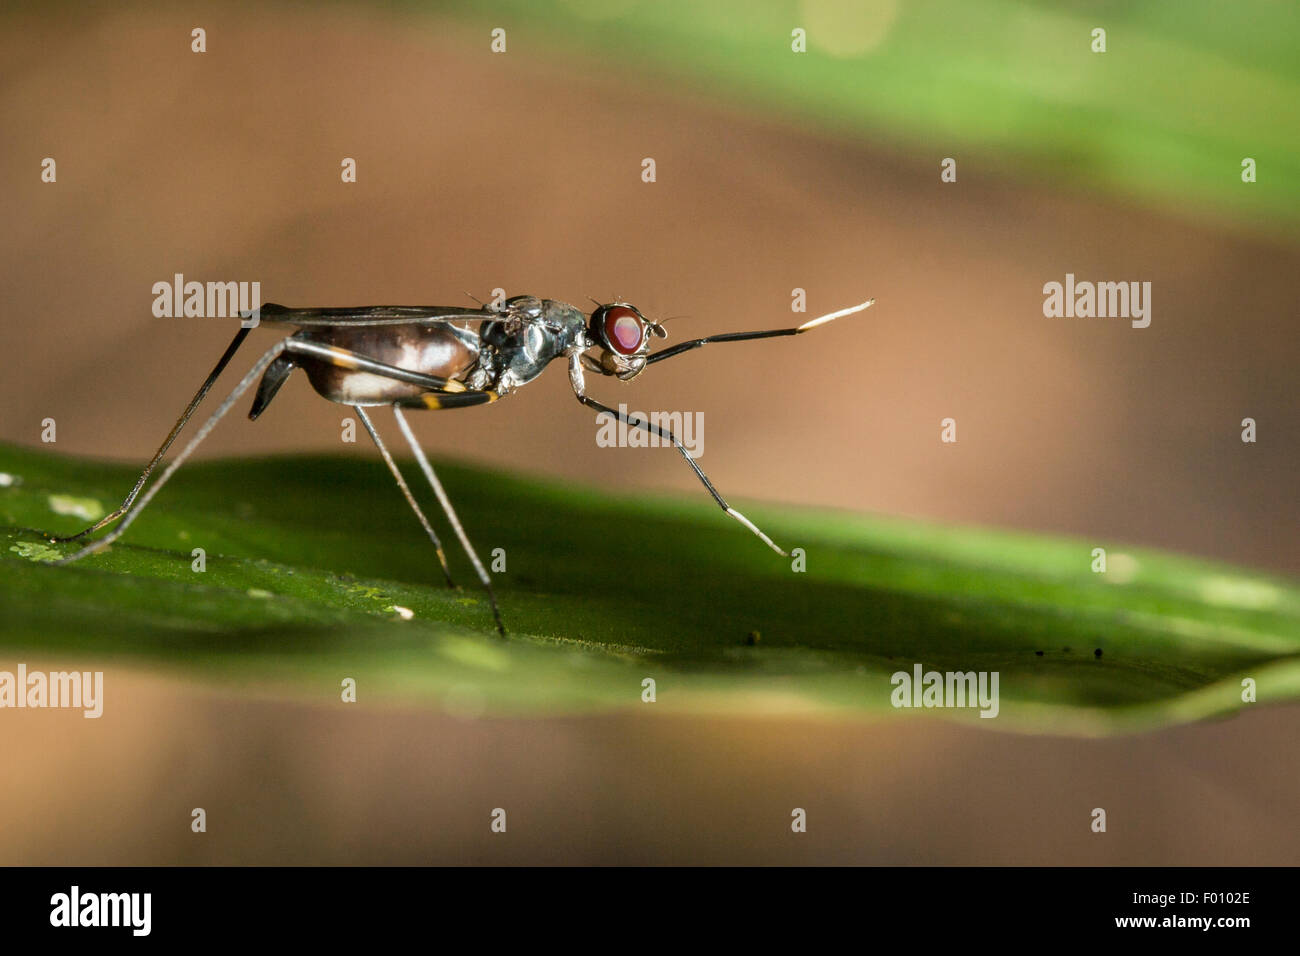 This stilt-legged fly waves its front legs, mimicking the antenna-waving of a wasp. This is an excellent example of mimicry. Stock Photo